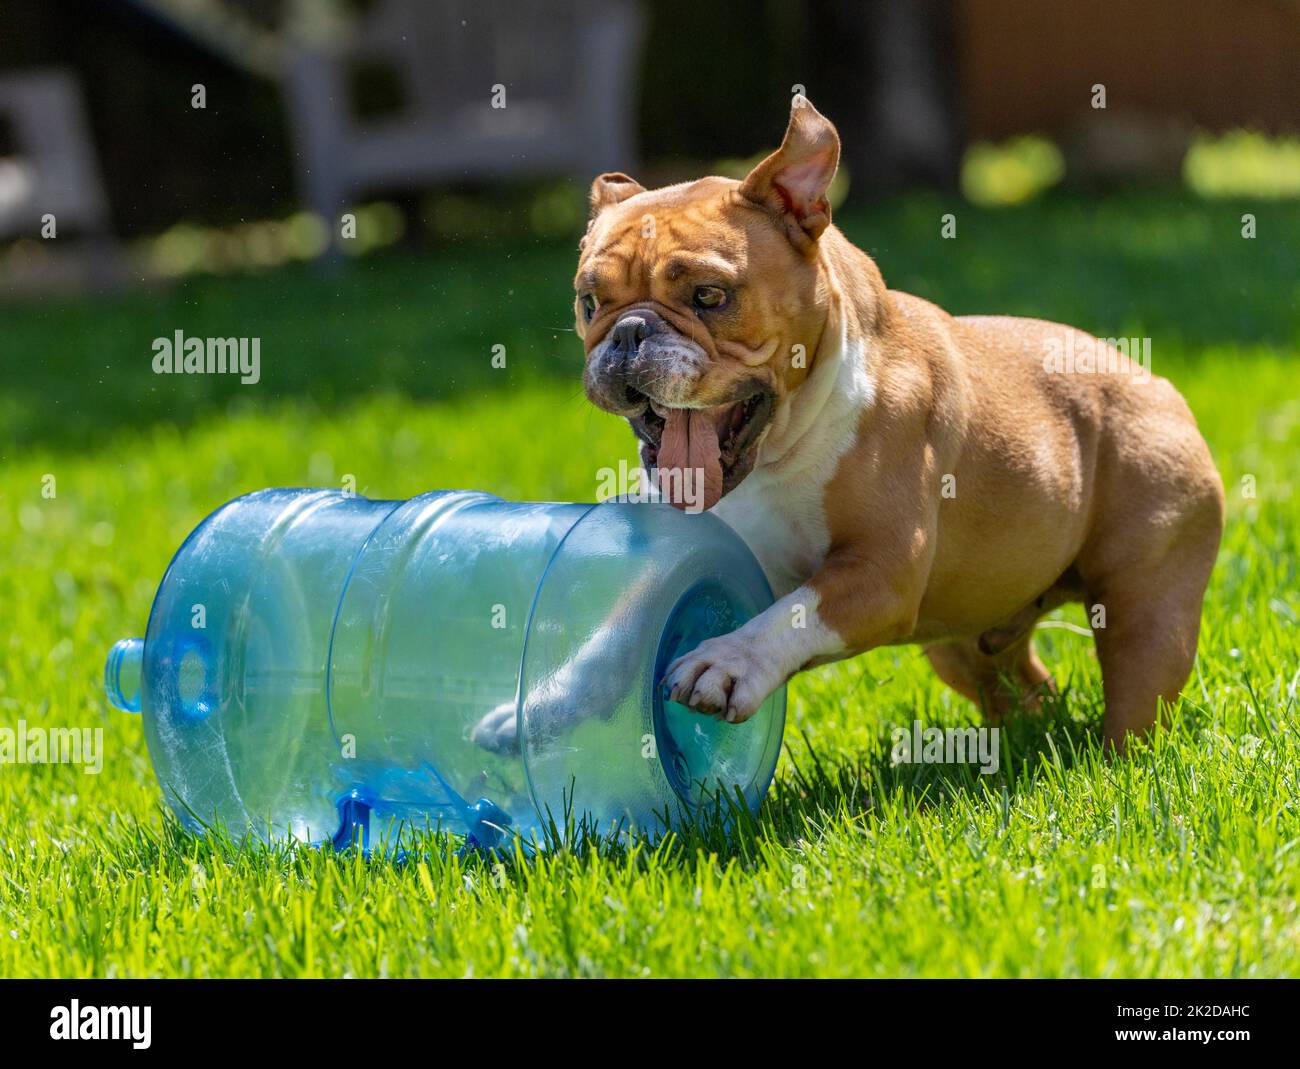 Red and white bulldog playing with a large wattle bottle in the grass Stock Photo